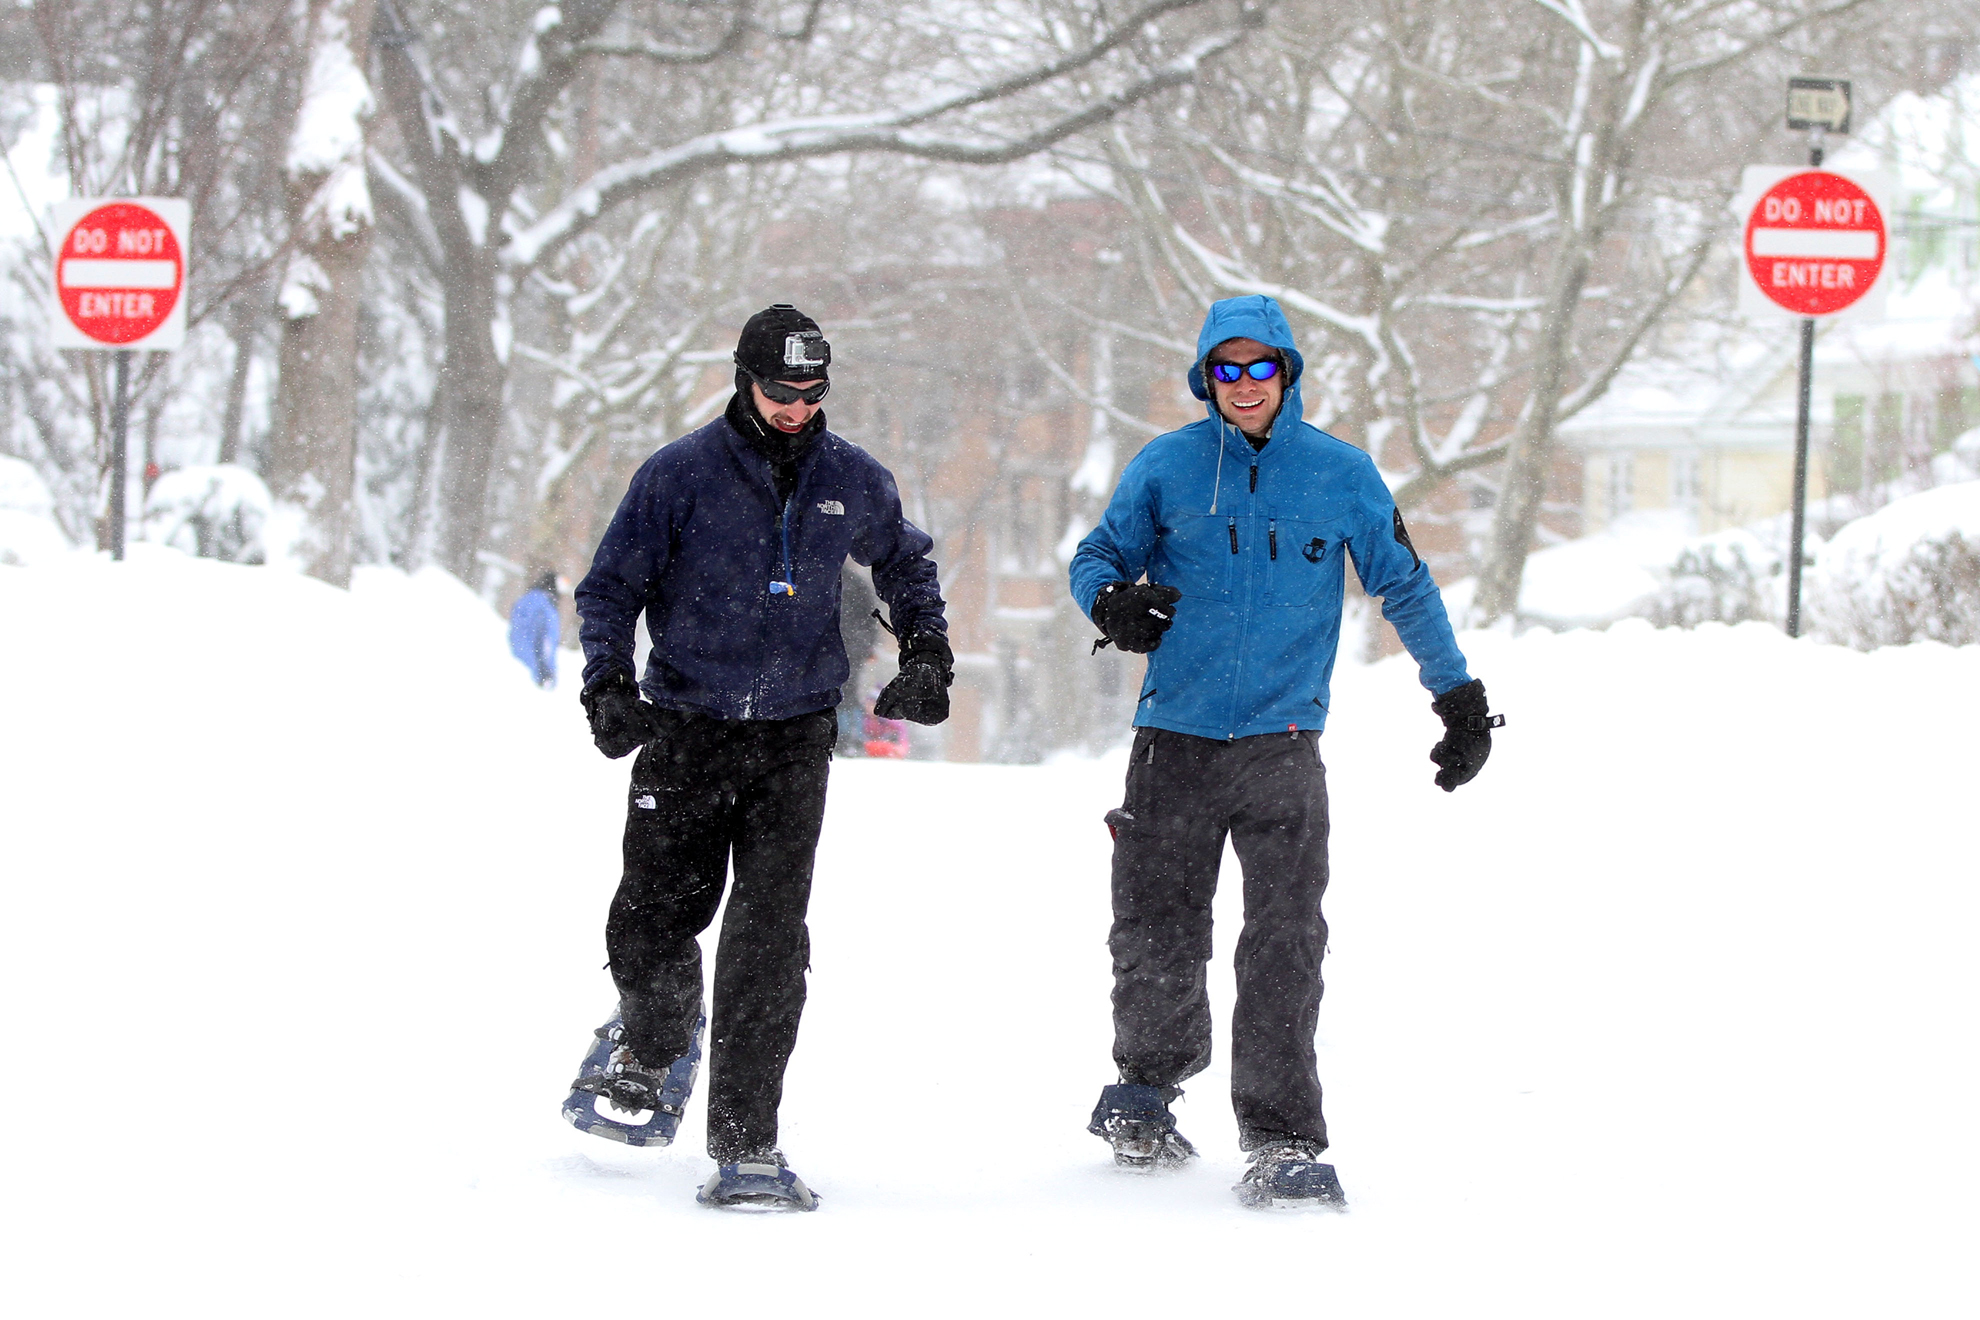 Image: Brookline residents Thomas Battey (left) and Vincent Valant walk with snowshoes down Fuller Street on Saturday after a winter storm passed through the Northeast, leaving over 20 inches of snow in the city of Boston. (Photo by Billie Weiss/BU News Service)